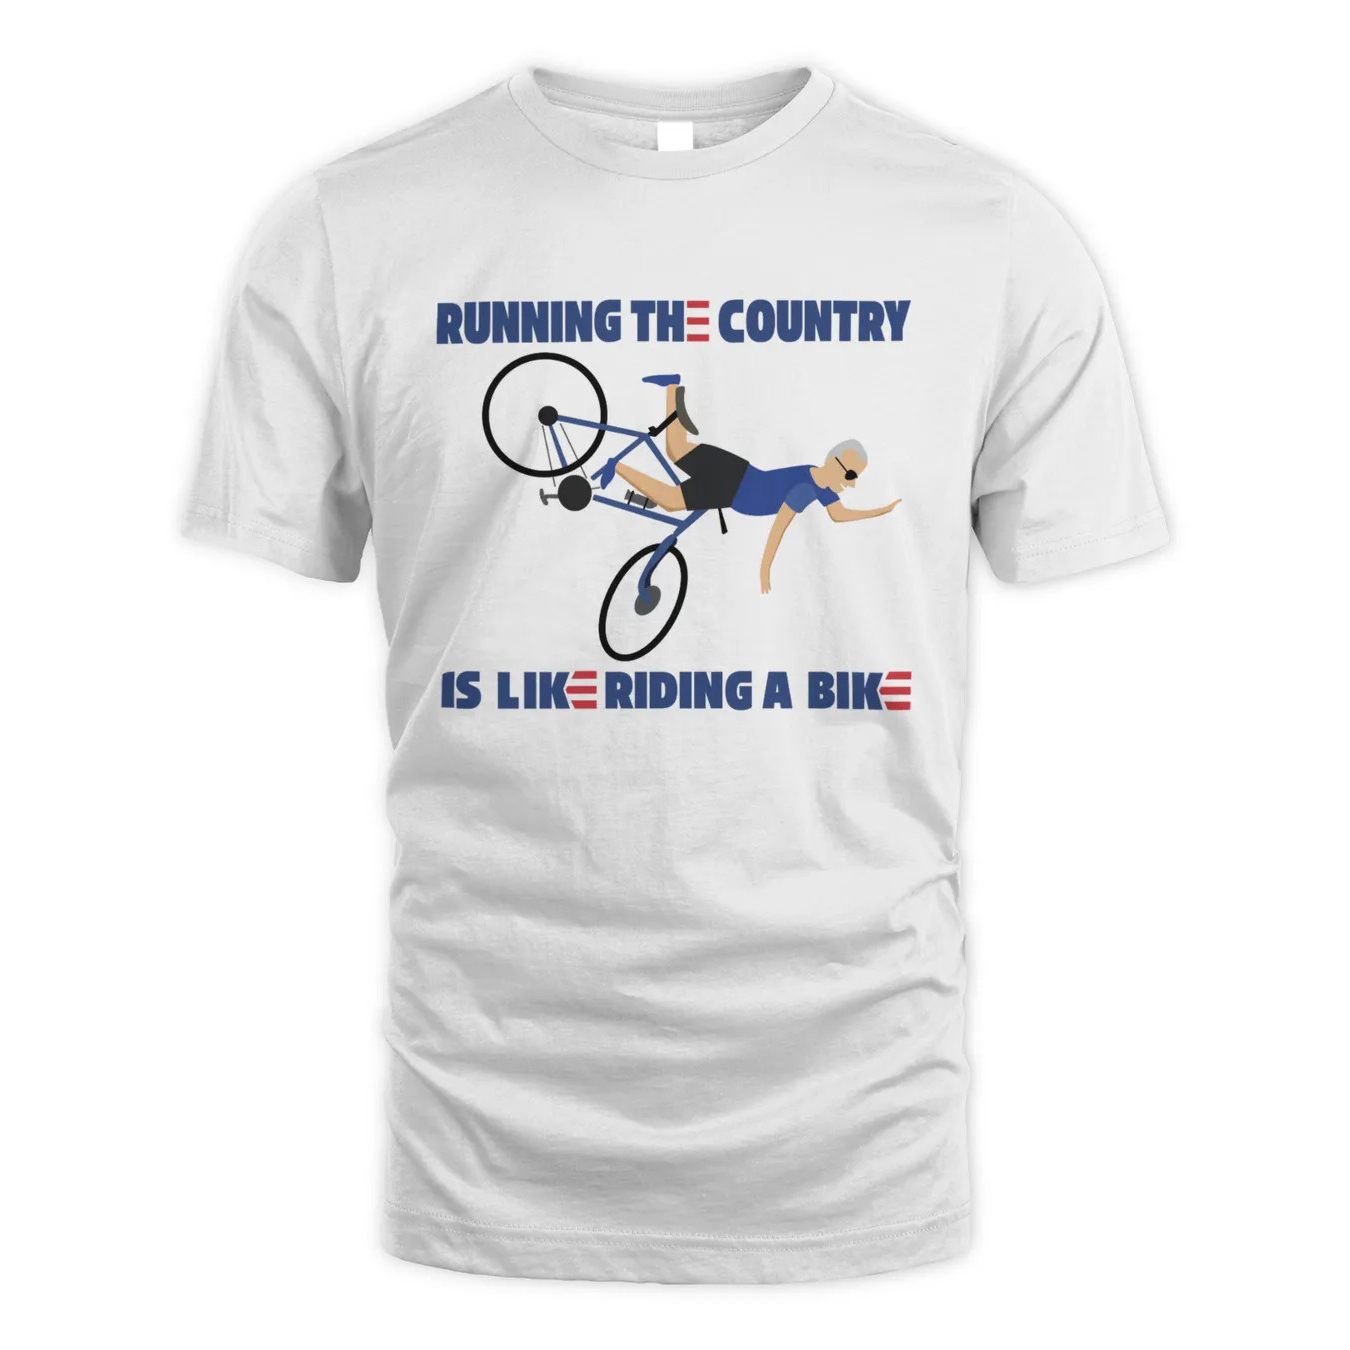 Running the country is like riding a bike shirt